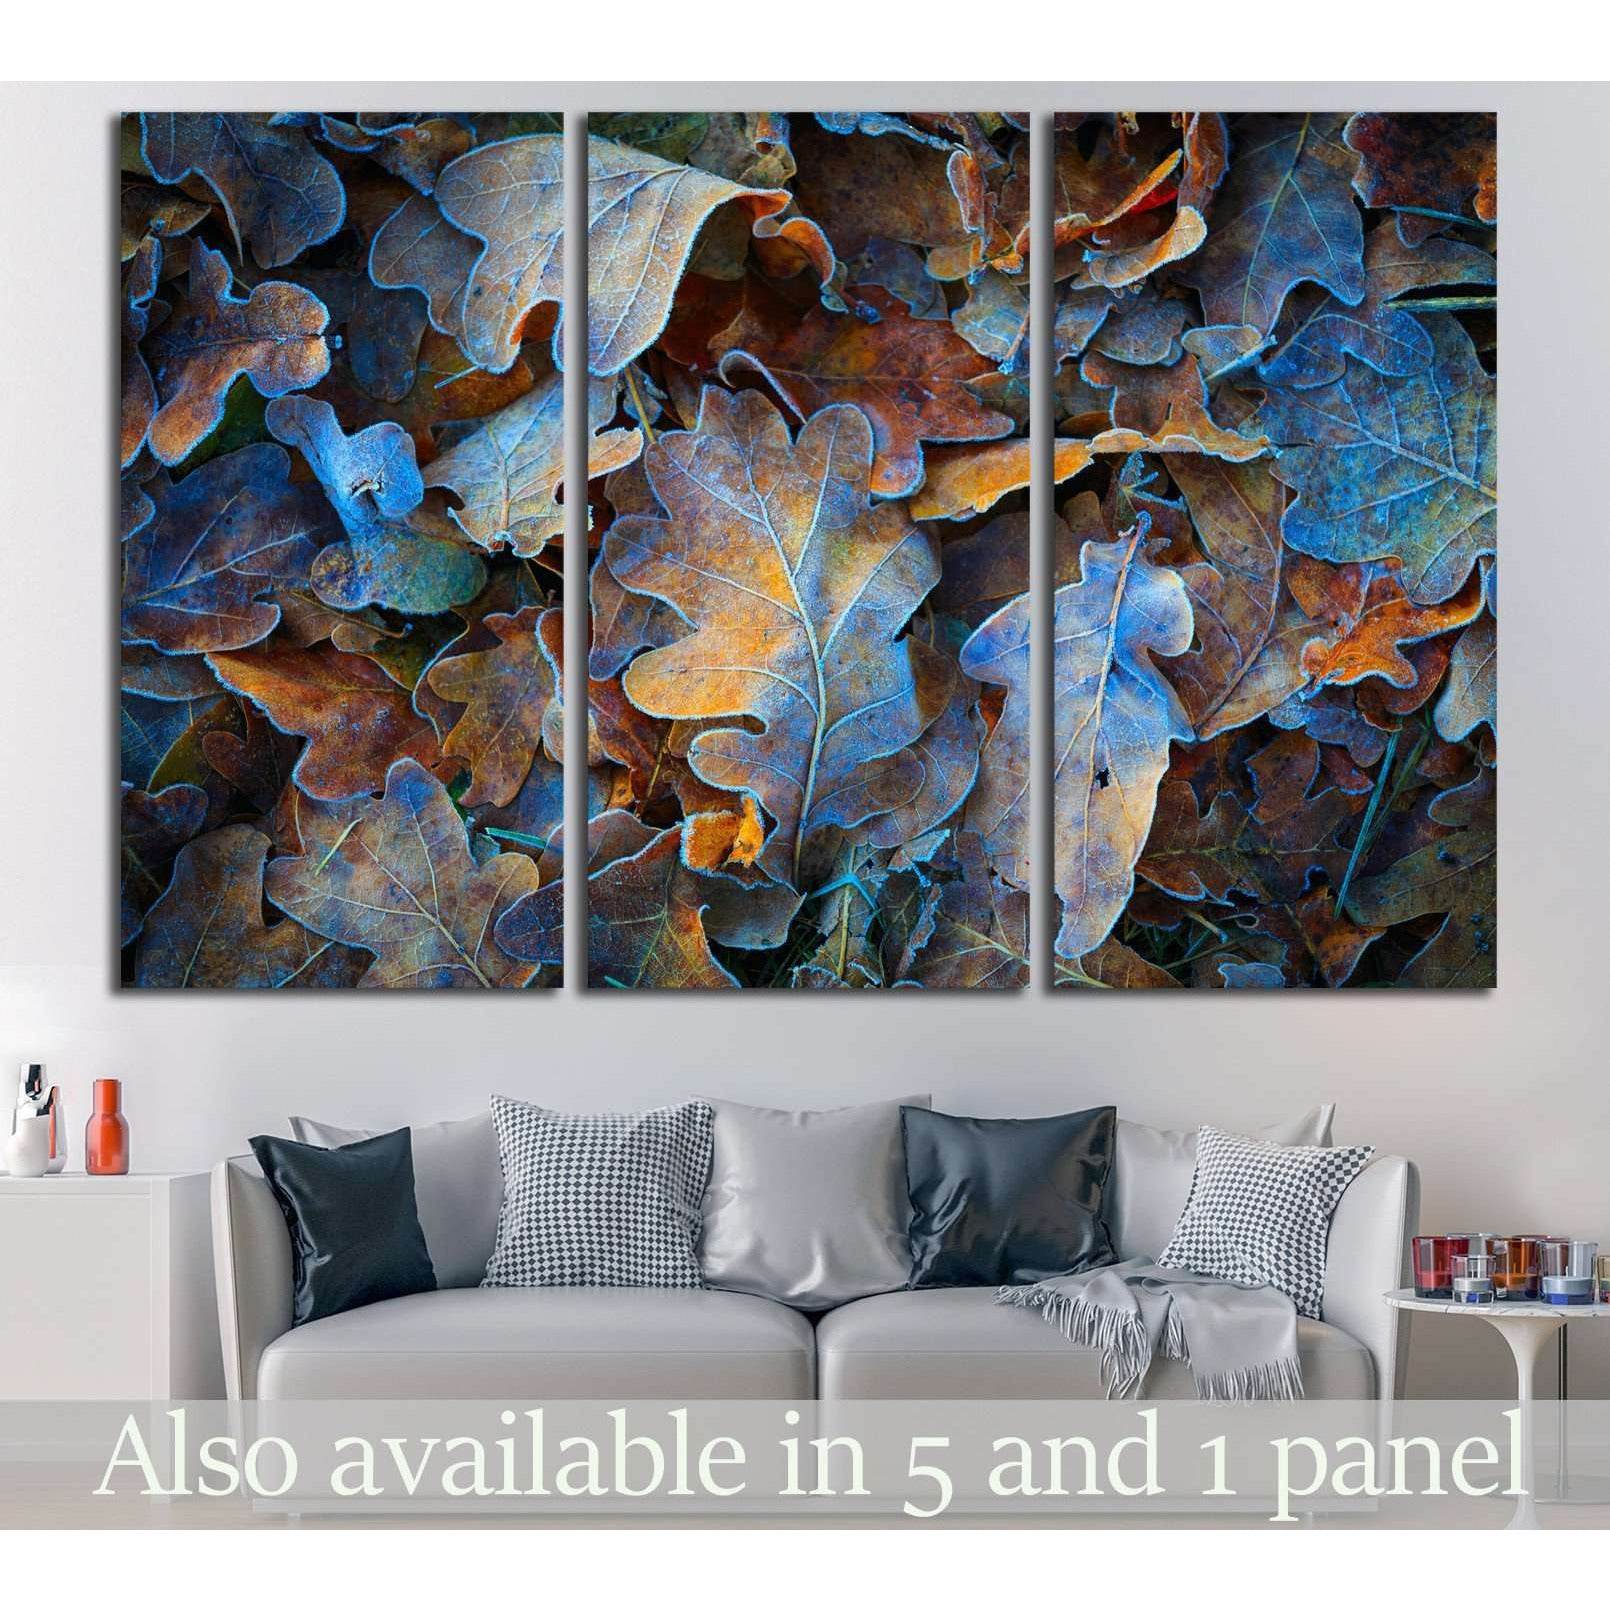 Autumn Hues Leaf Print for Dynamic Living Room Wall AccentsThis canvas print illustrates an intricate array of oak leaves in a spectrum of colors, from deep blues to rustic oranges, perfect for bringing an artistic and organic touch to spaces such as livi